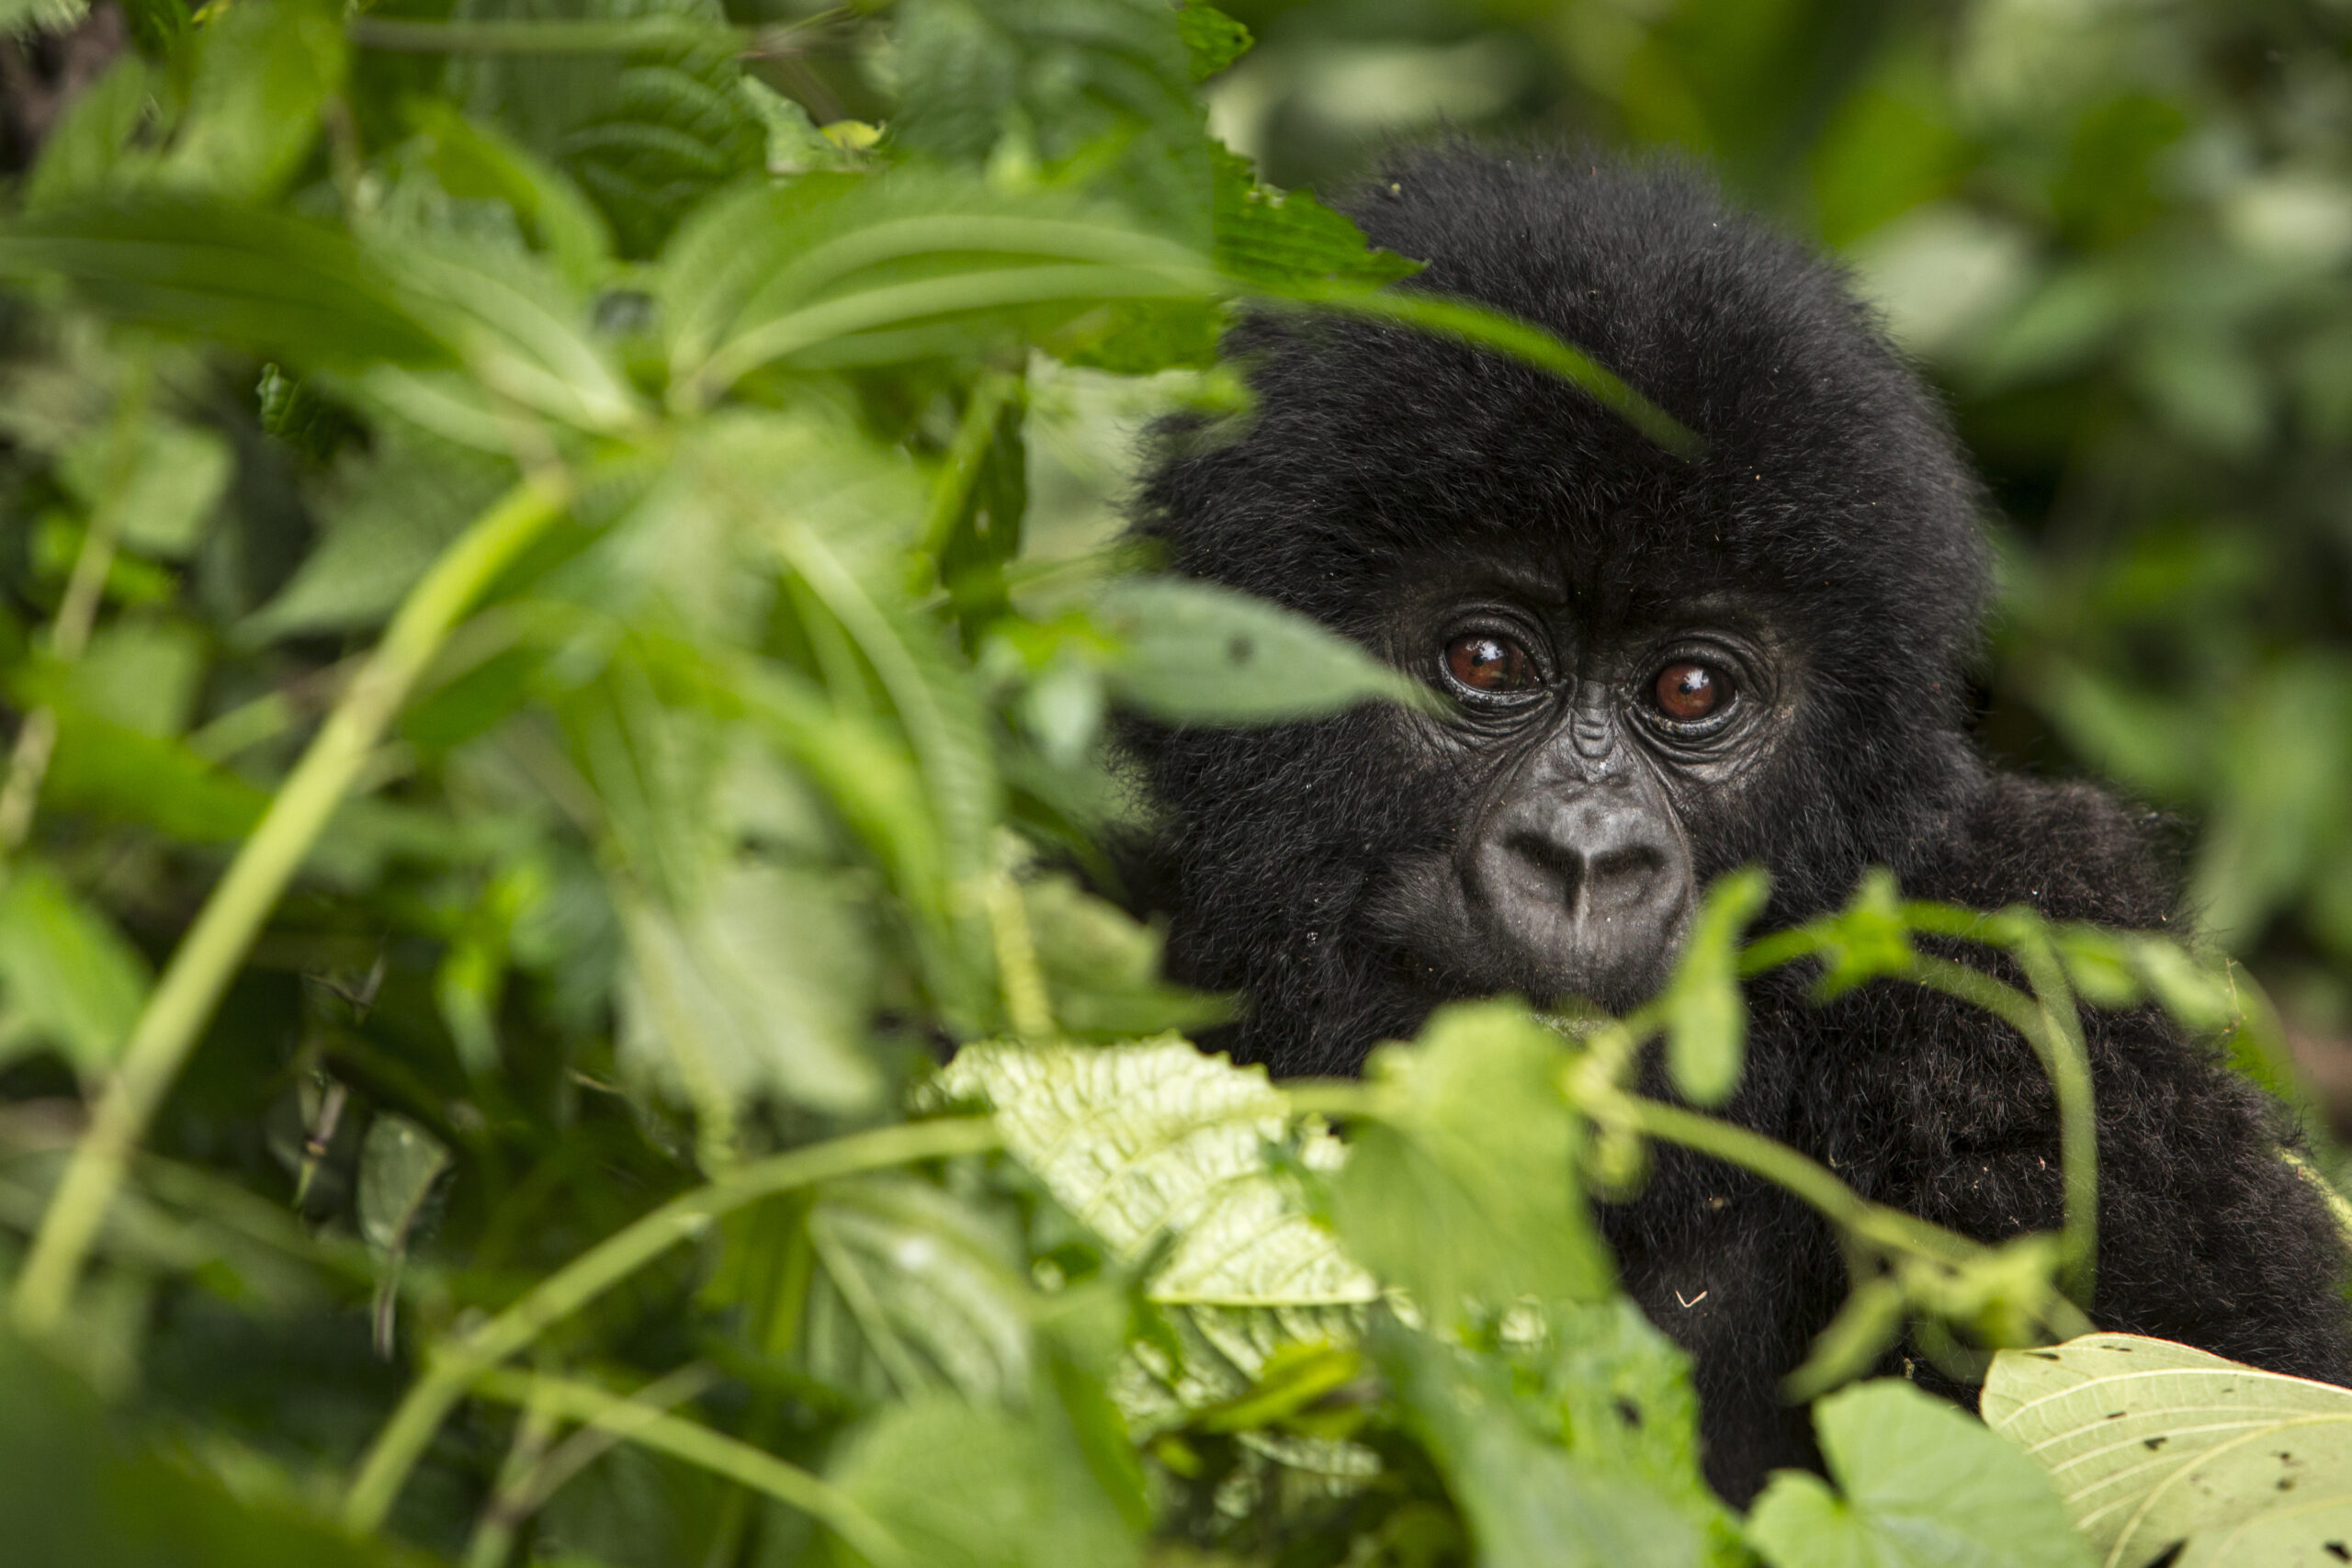 a young gorilla with black fur and reddish brown eyes peeks out from behind green leaves